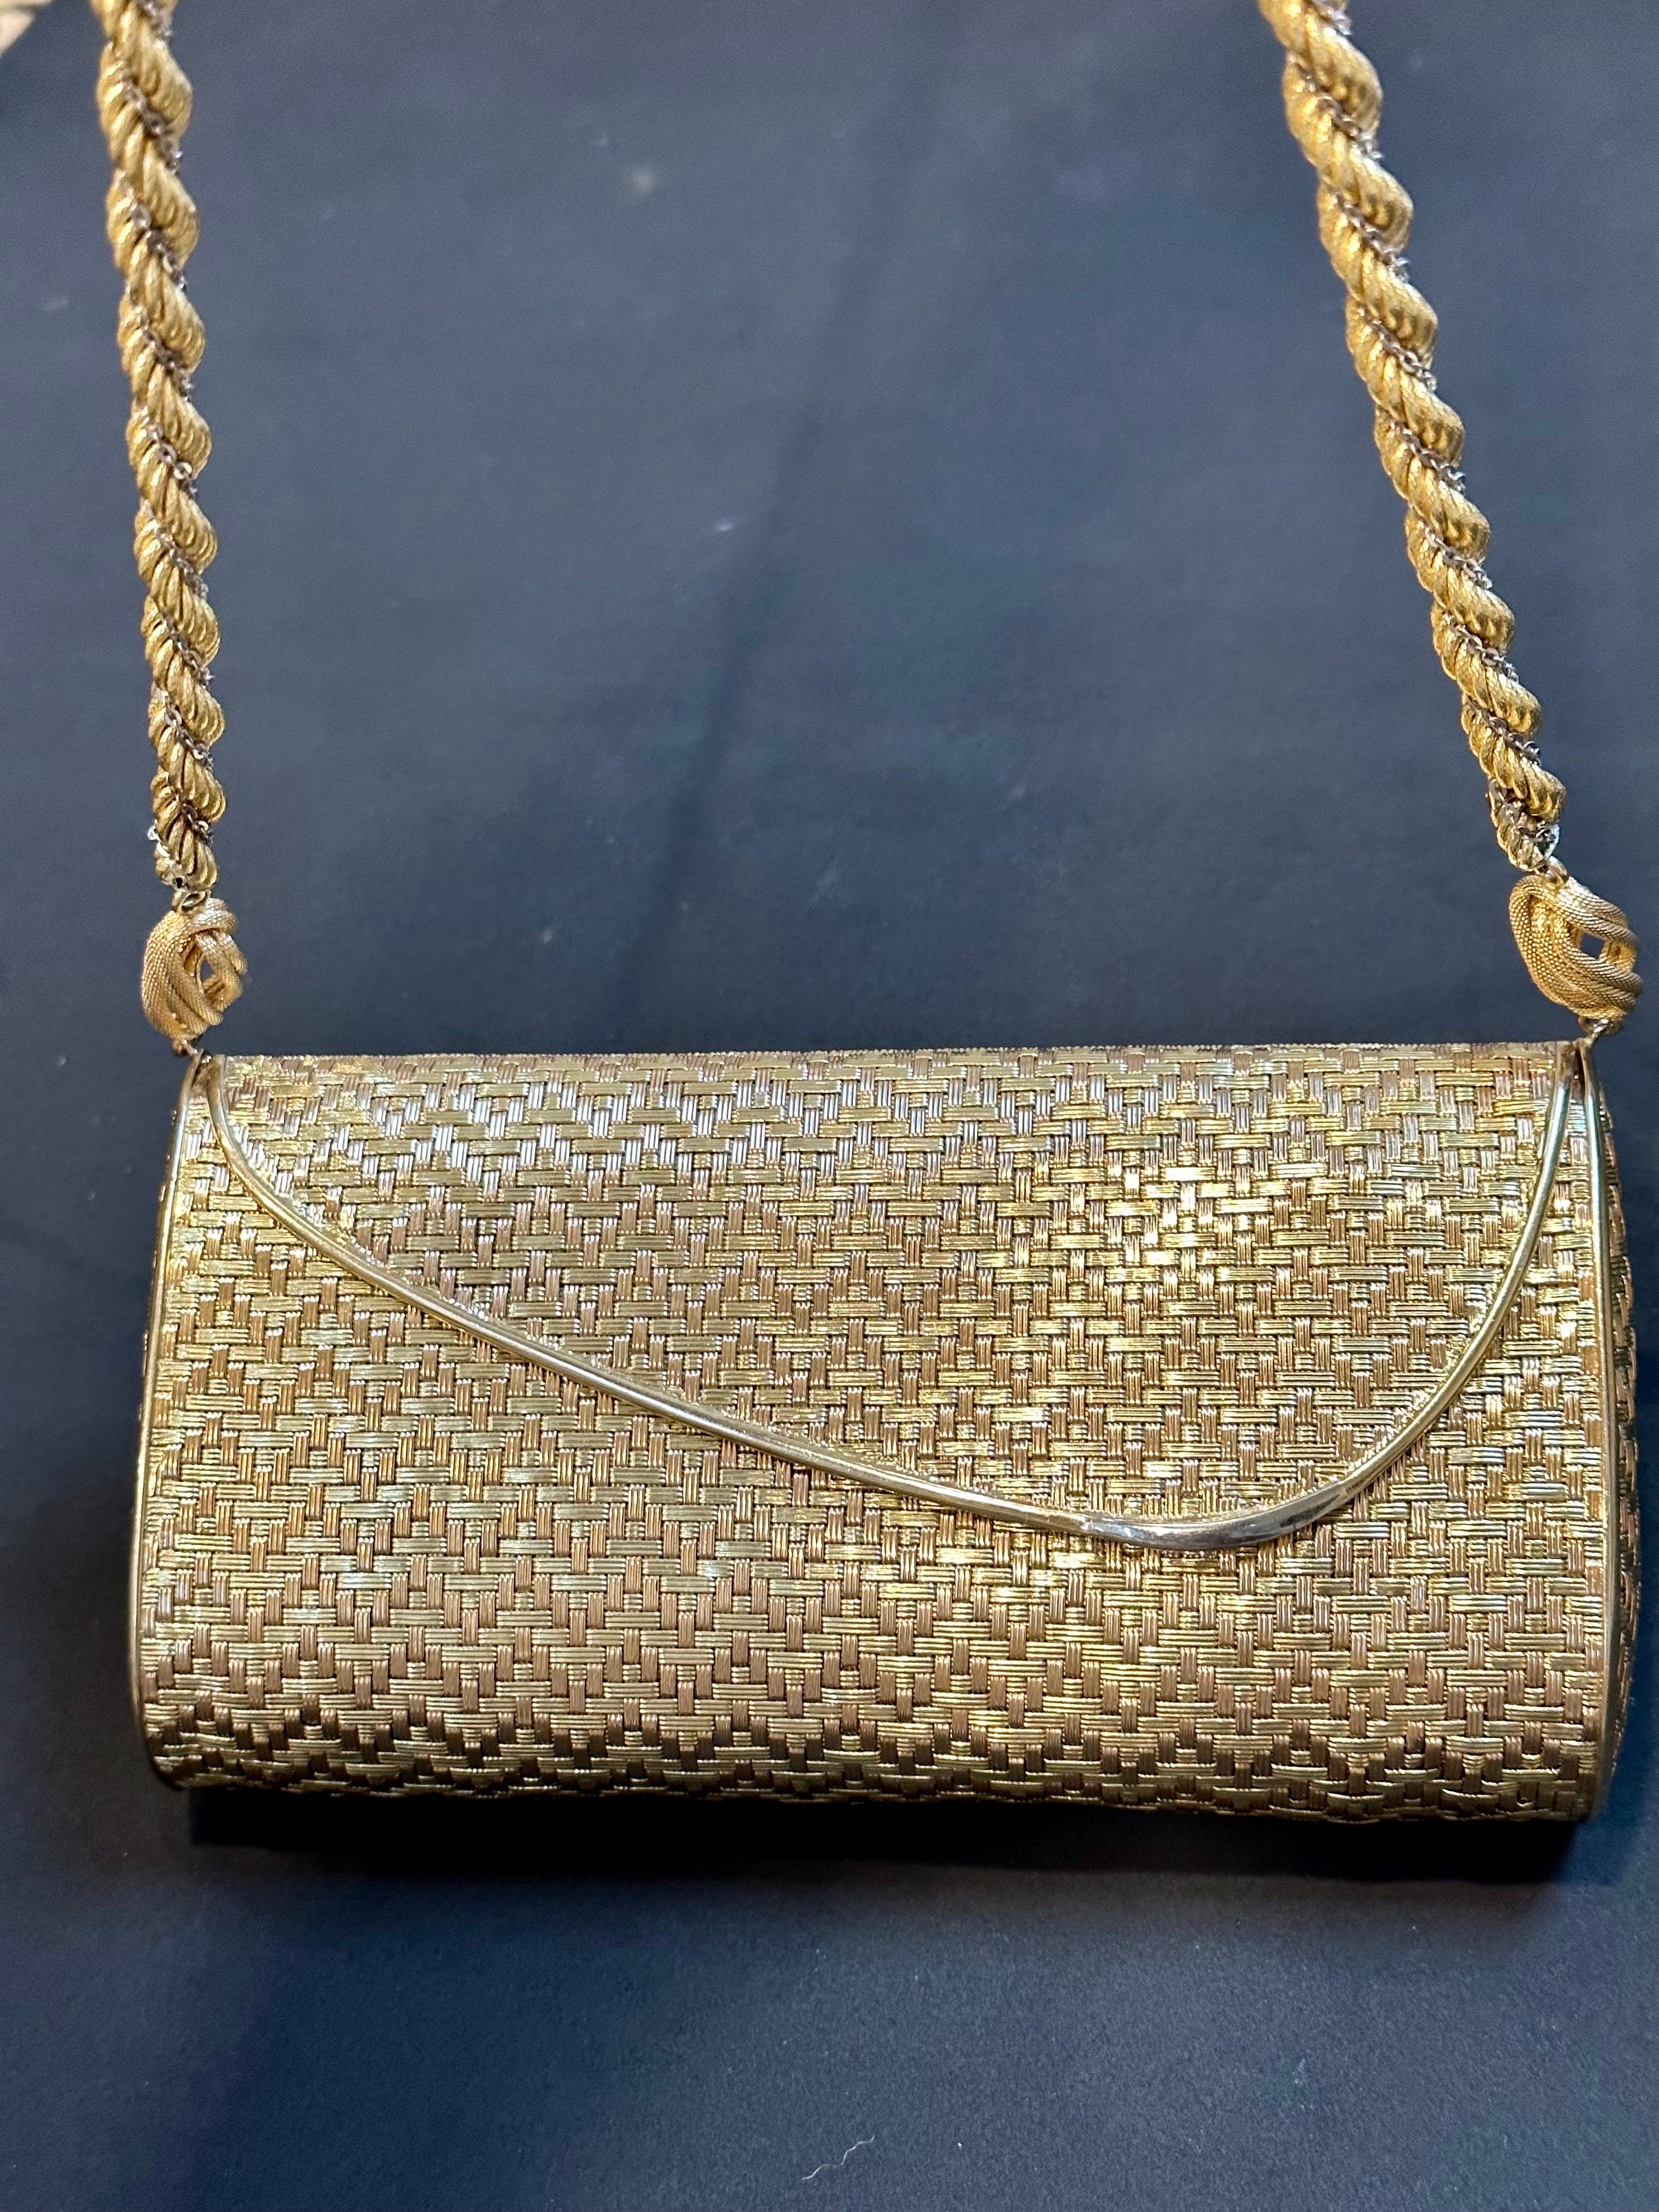 Cartier 18k Yellow Gold Mesh Purse Handbag with Shoulder Chain Rare 401 Gm For Sale 4